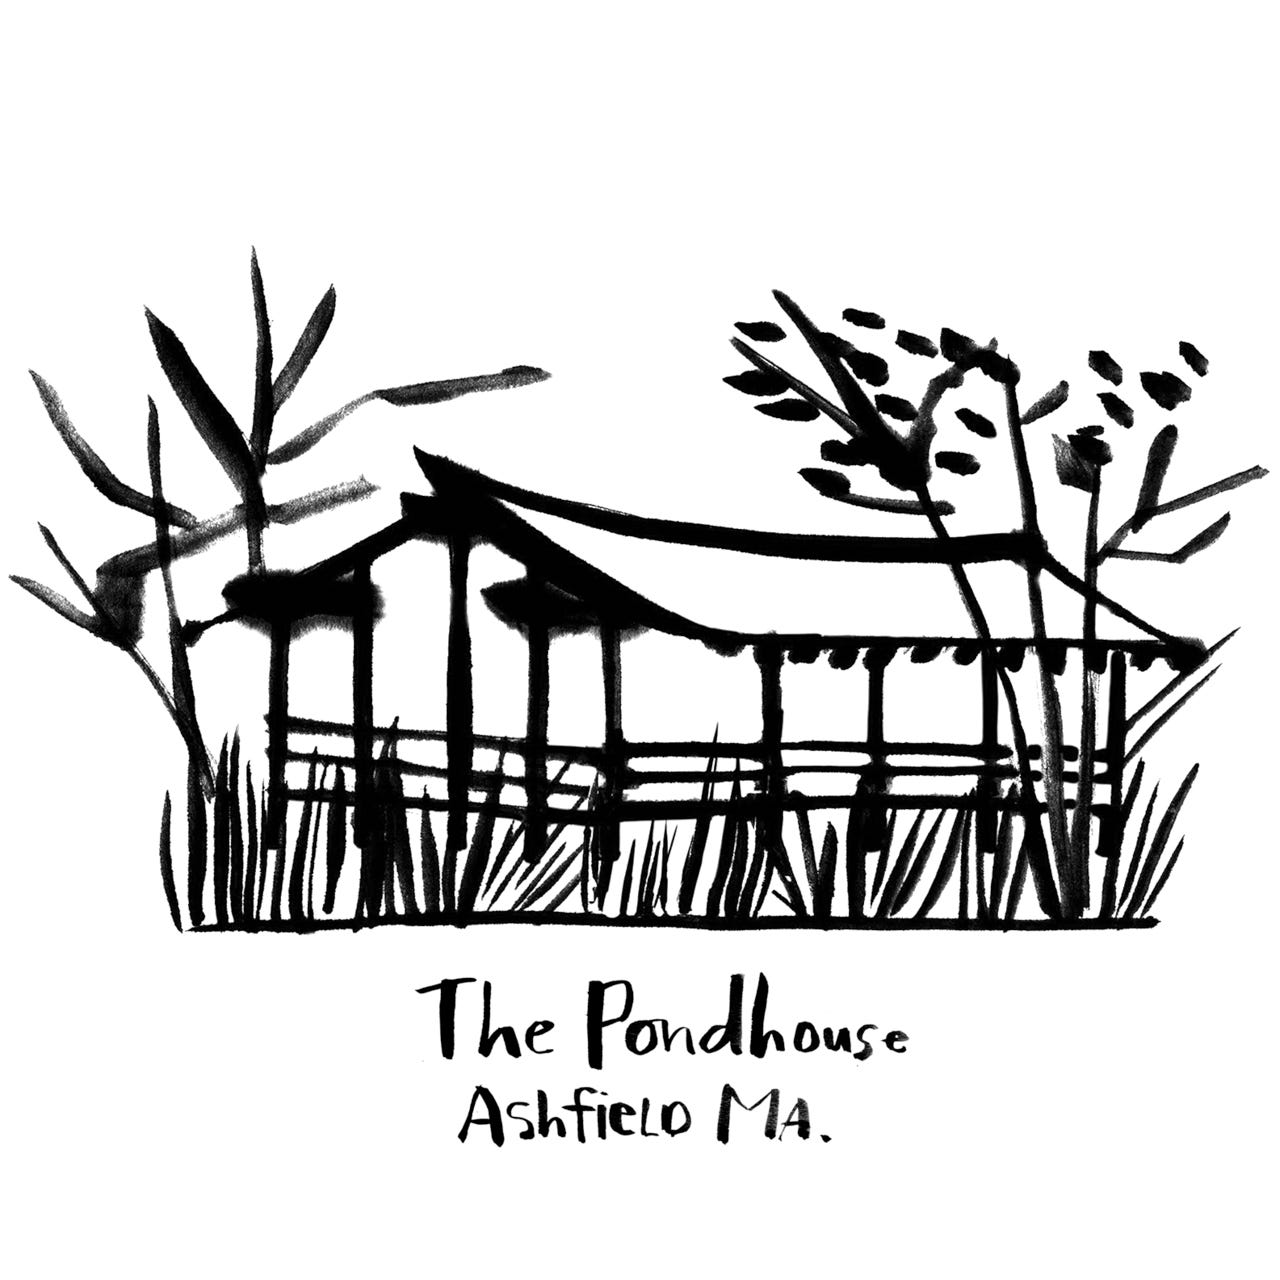 Artwork for The Pondhouse